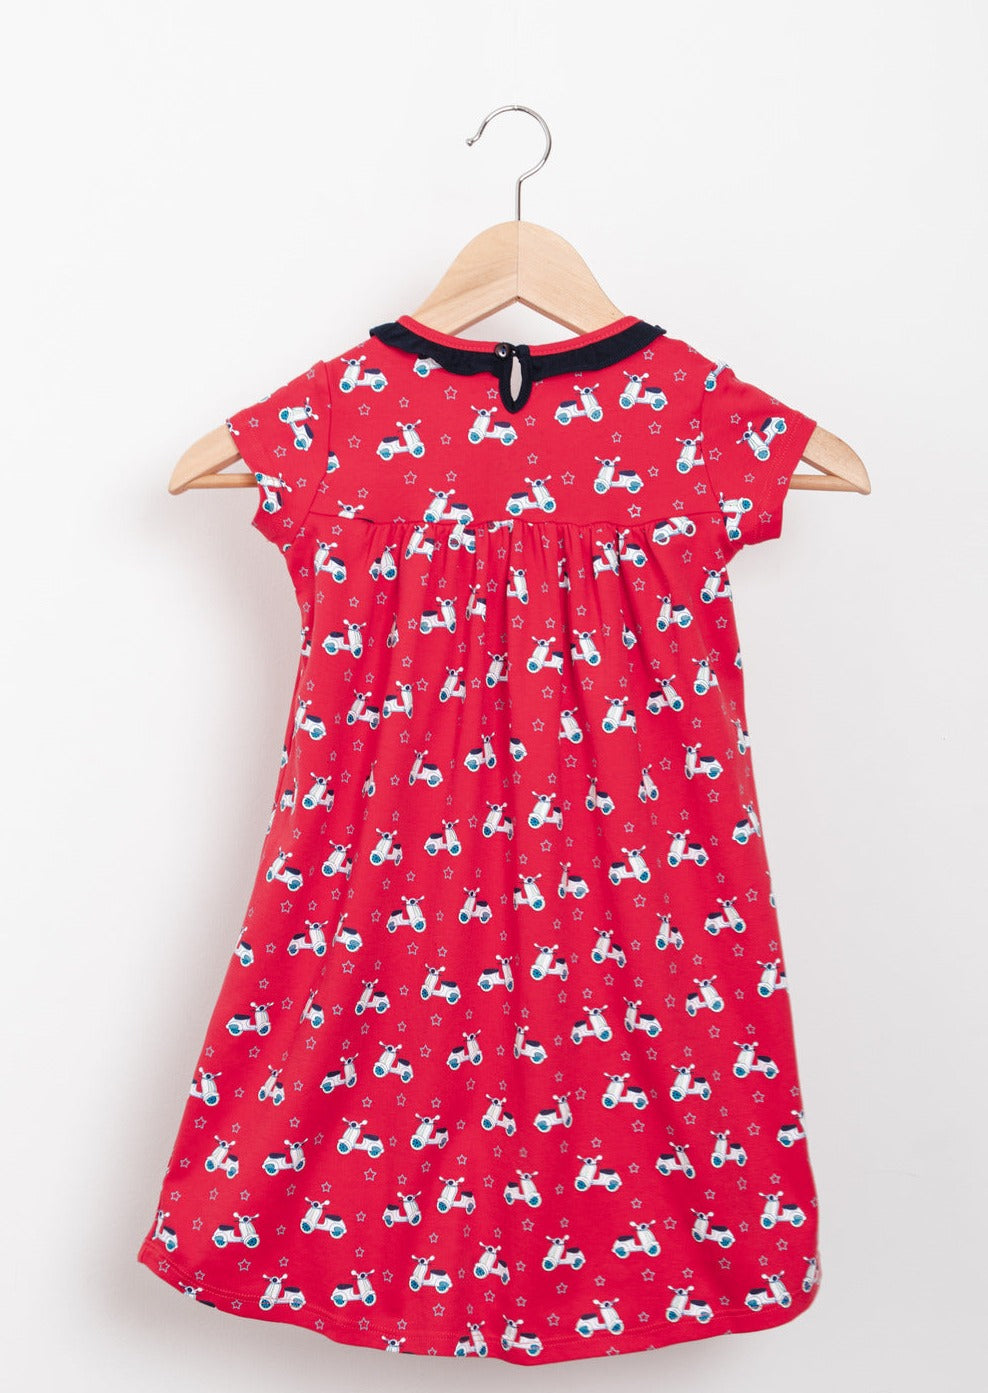 Girl dress, with prints of vespas and stars with front pockets. Non Stereotypes design, eco-friendly materials.